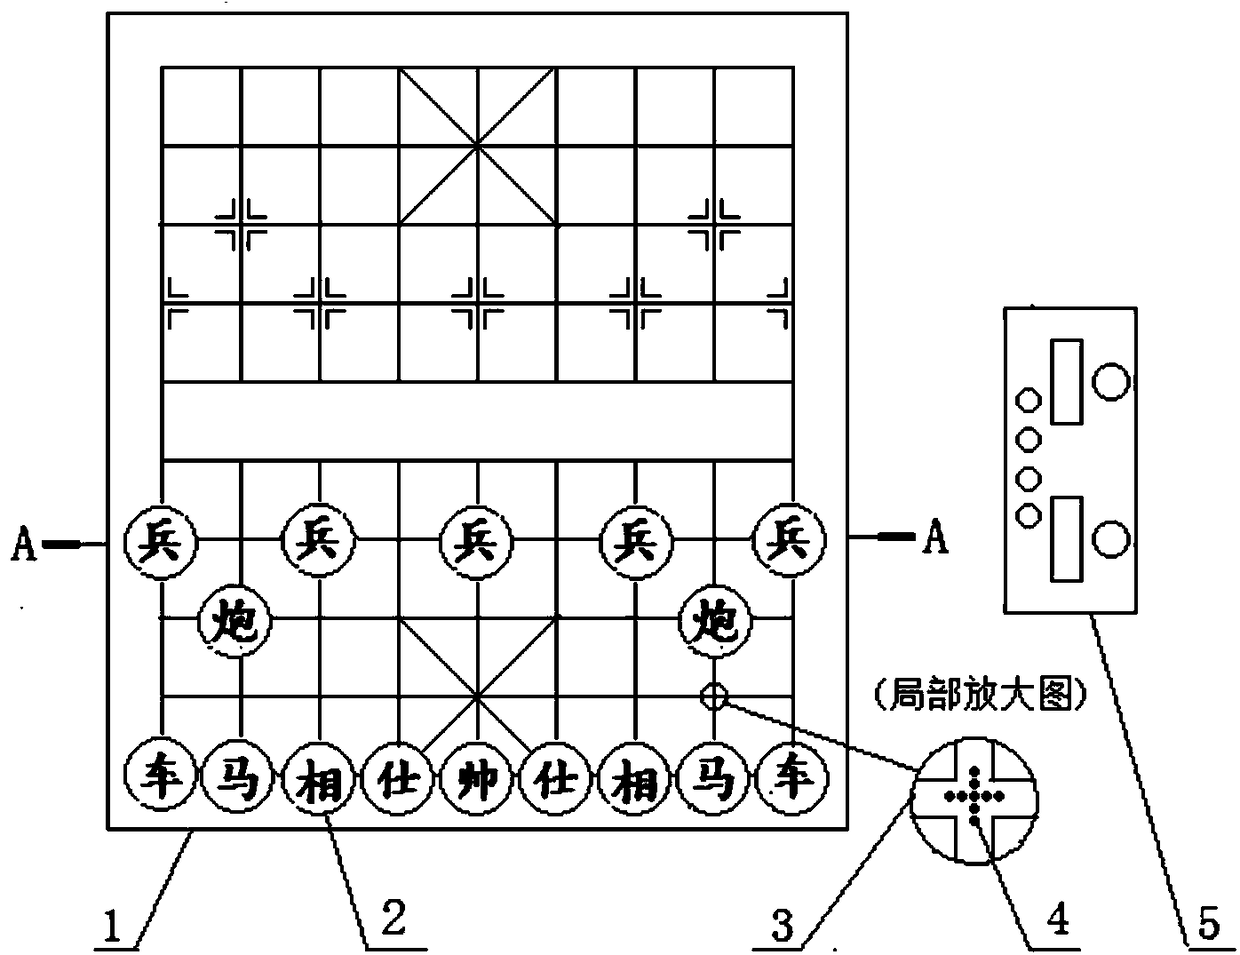 A chess notation device and method based on wireless power supply technology